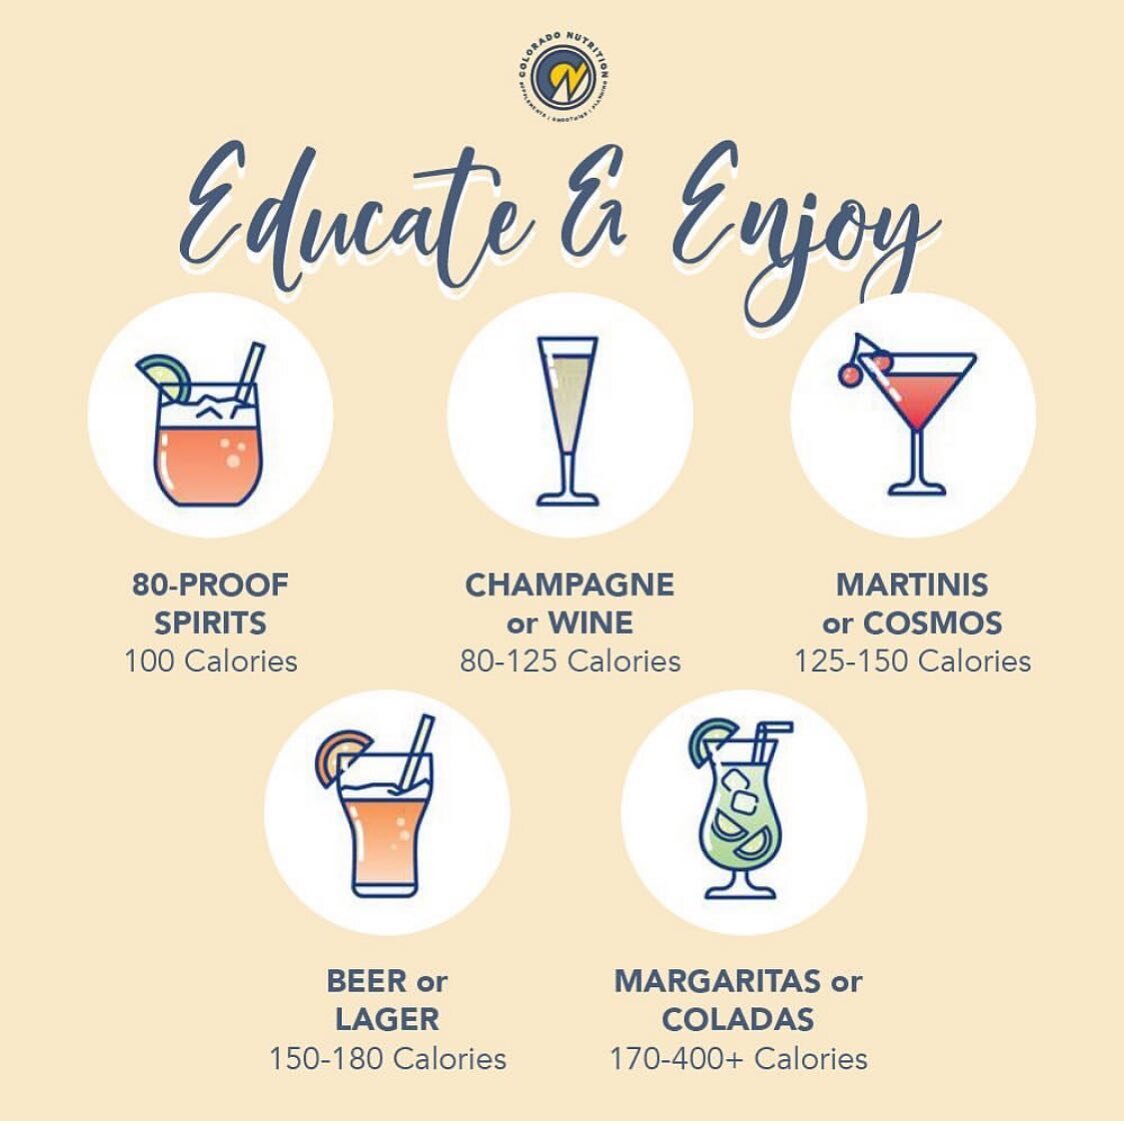 ⭐️ EDUCATE &amp; ENJOY 🎉 It&rsquo;s a holiday weekend and we want to celebrate! And we can and should! When it comes to drinks and cocktails, we believe that knowing what you&rsquo;re consuming will help you confidently decide how and what to enjoy!